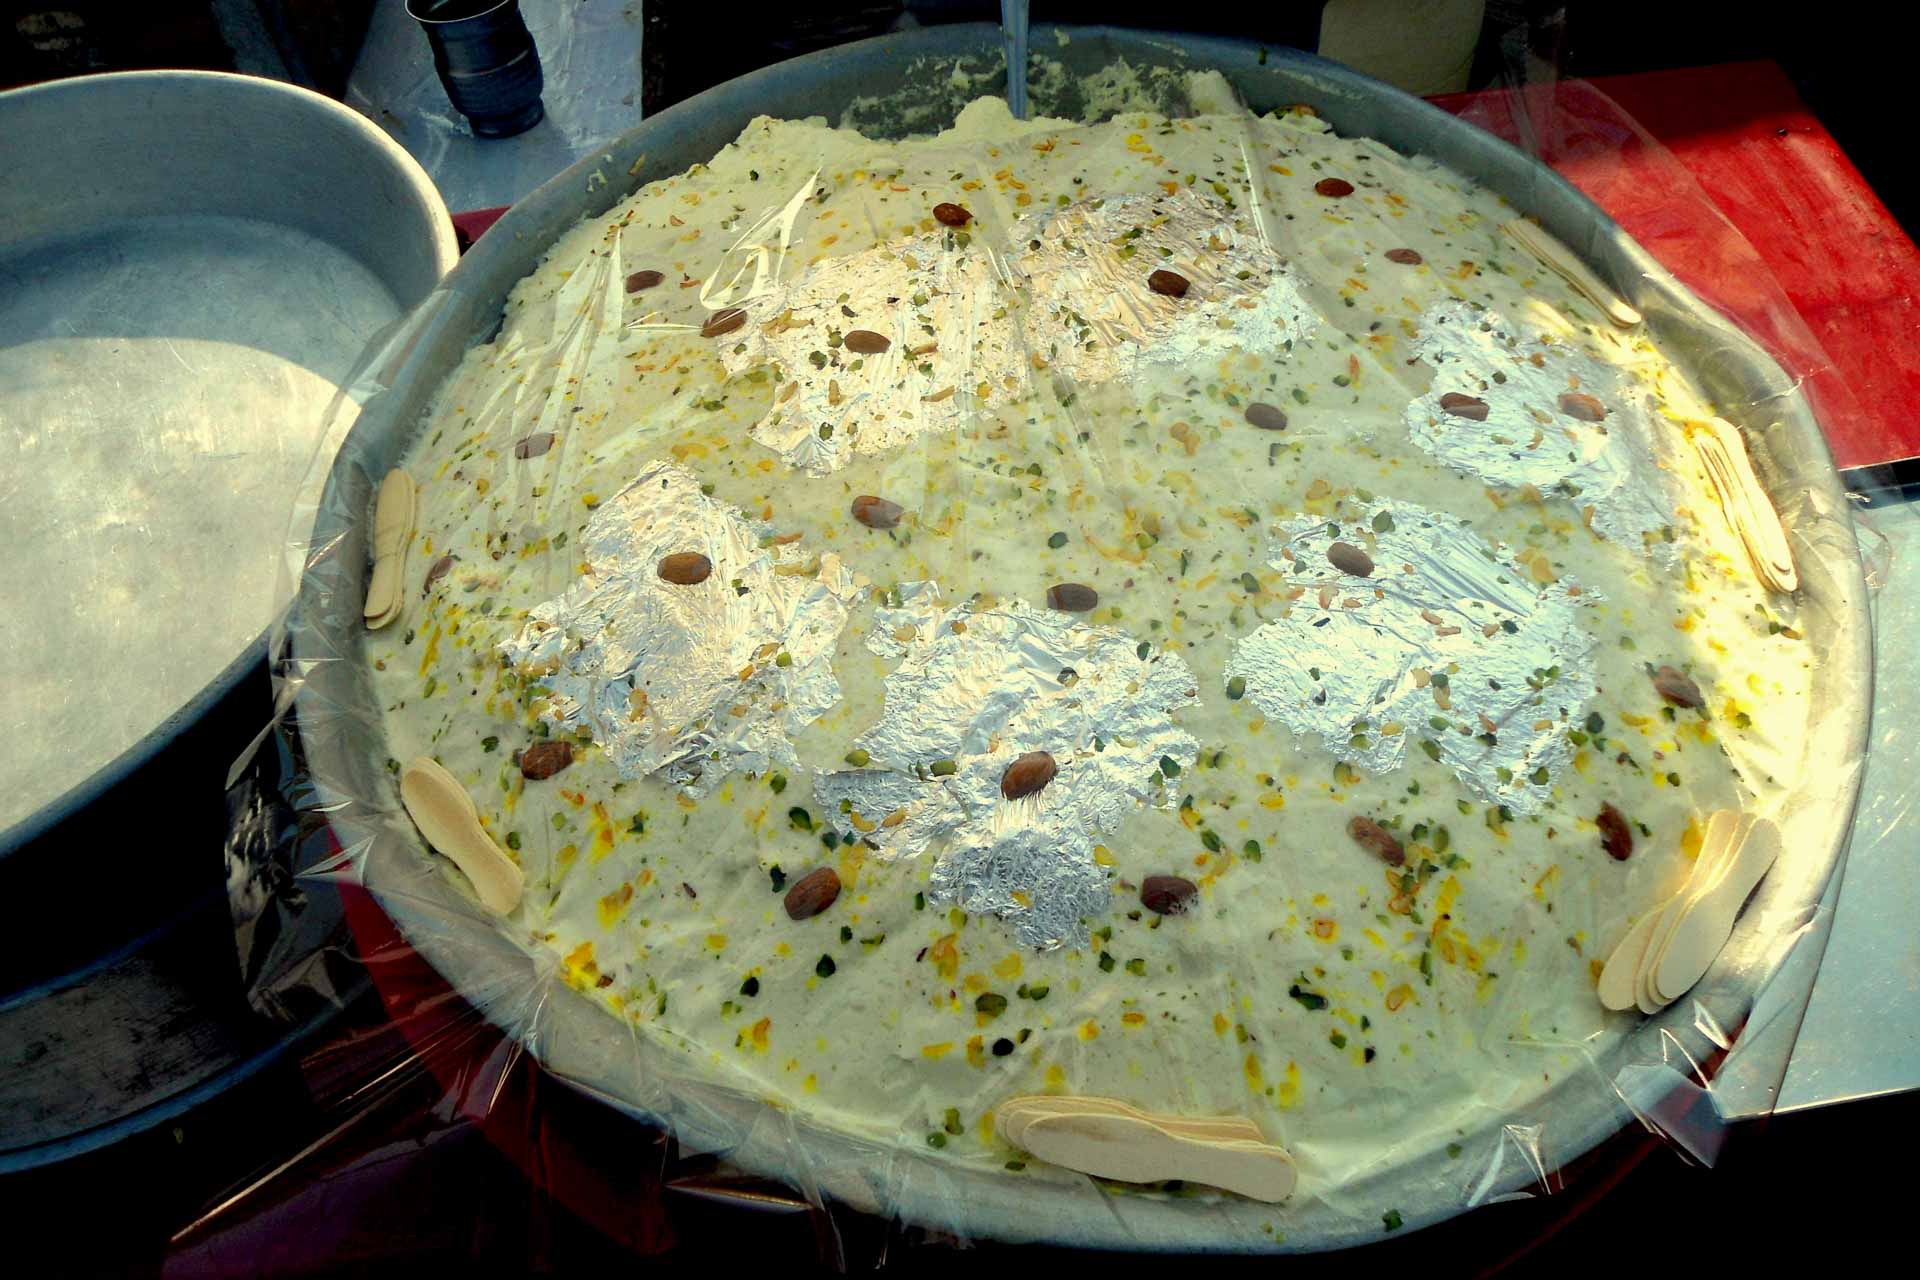 Makhan malai Lucknow dessert made only in the winter